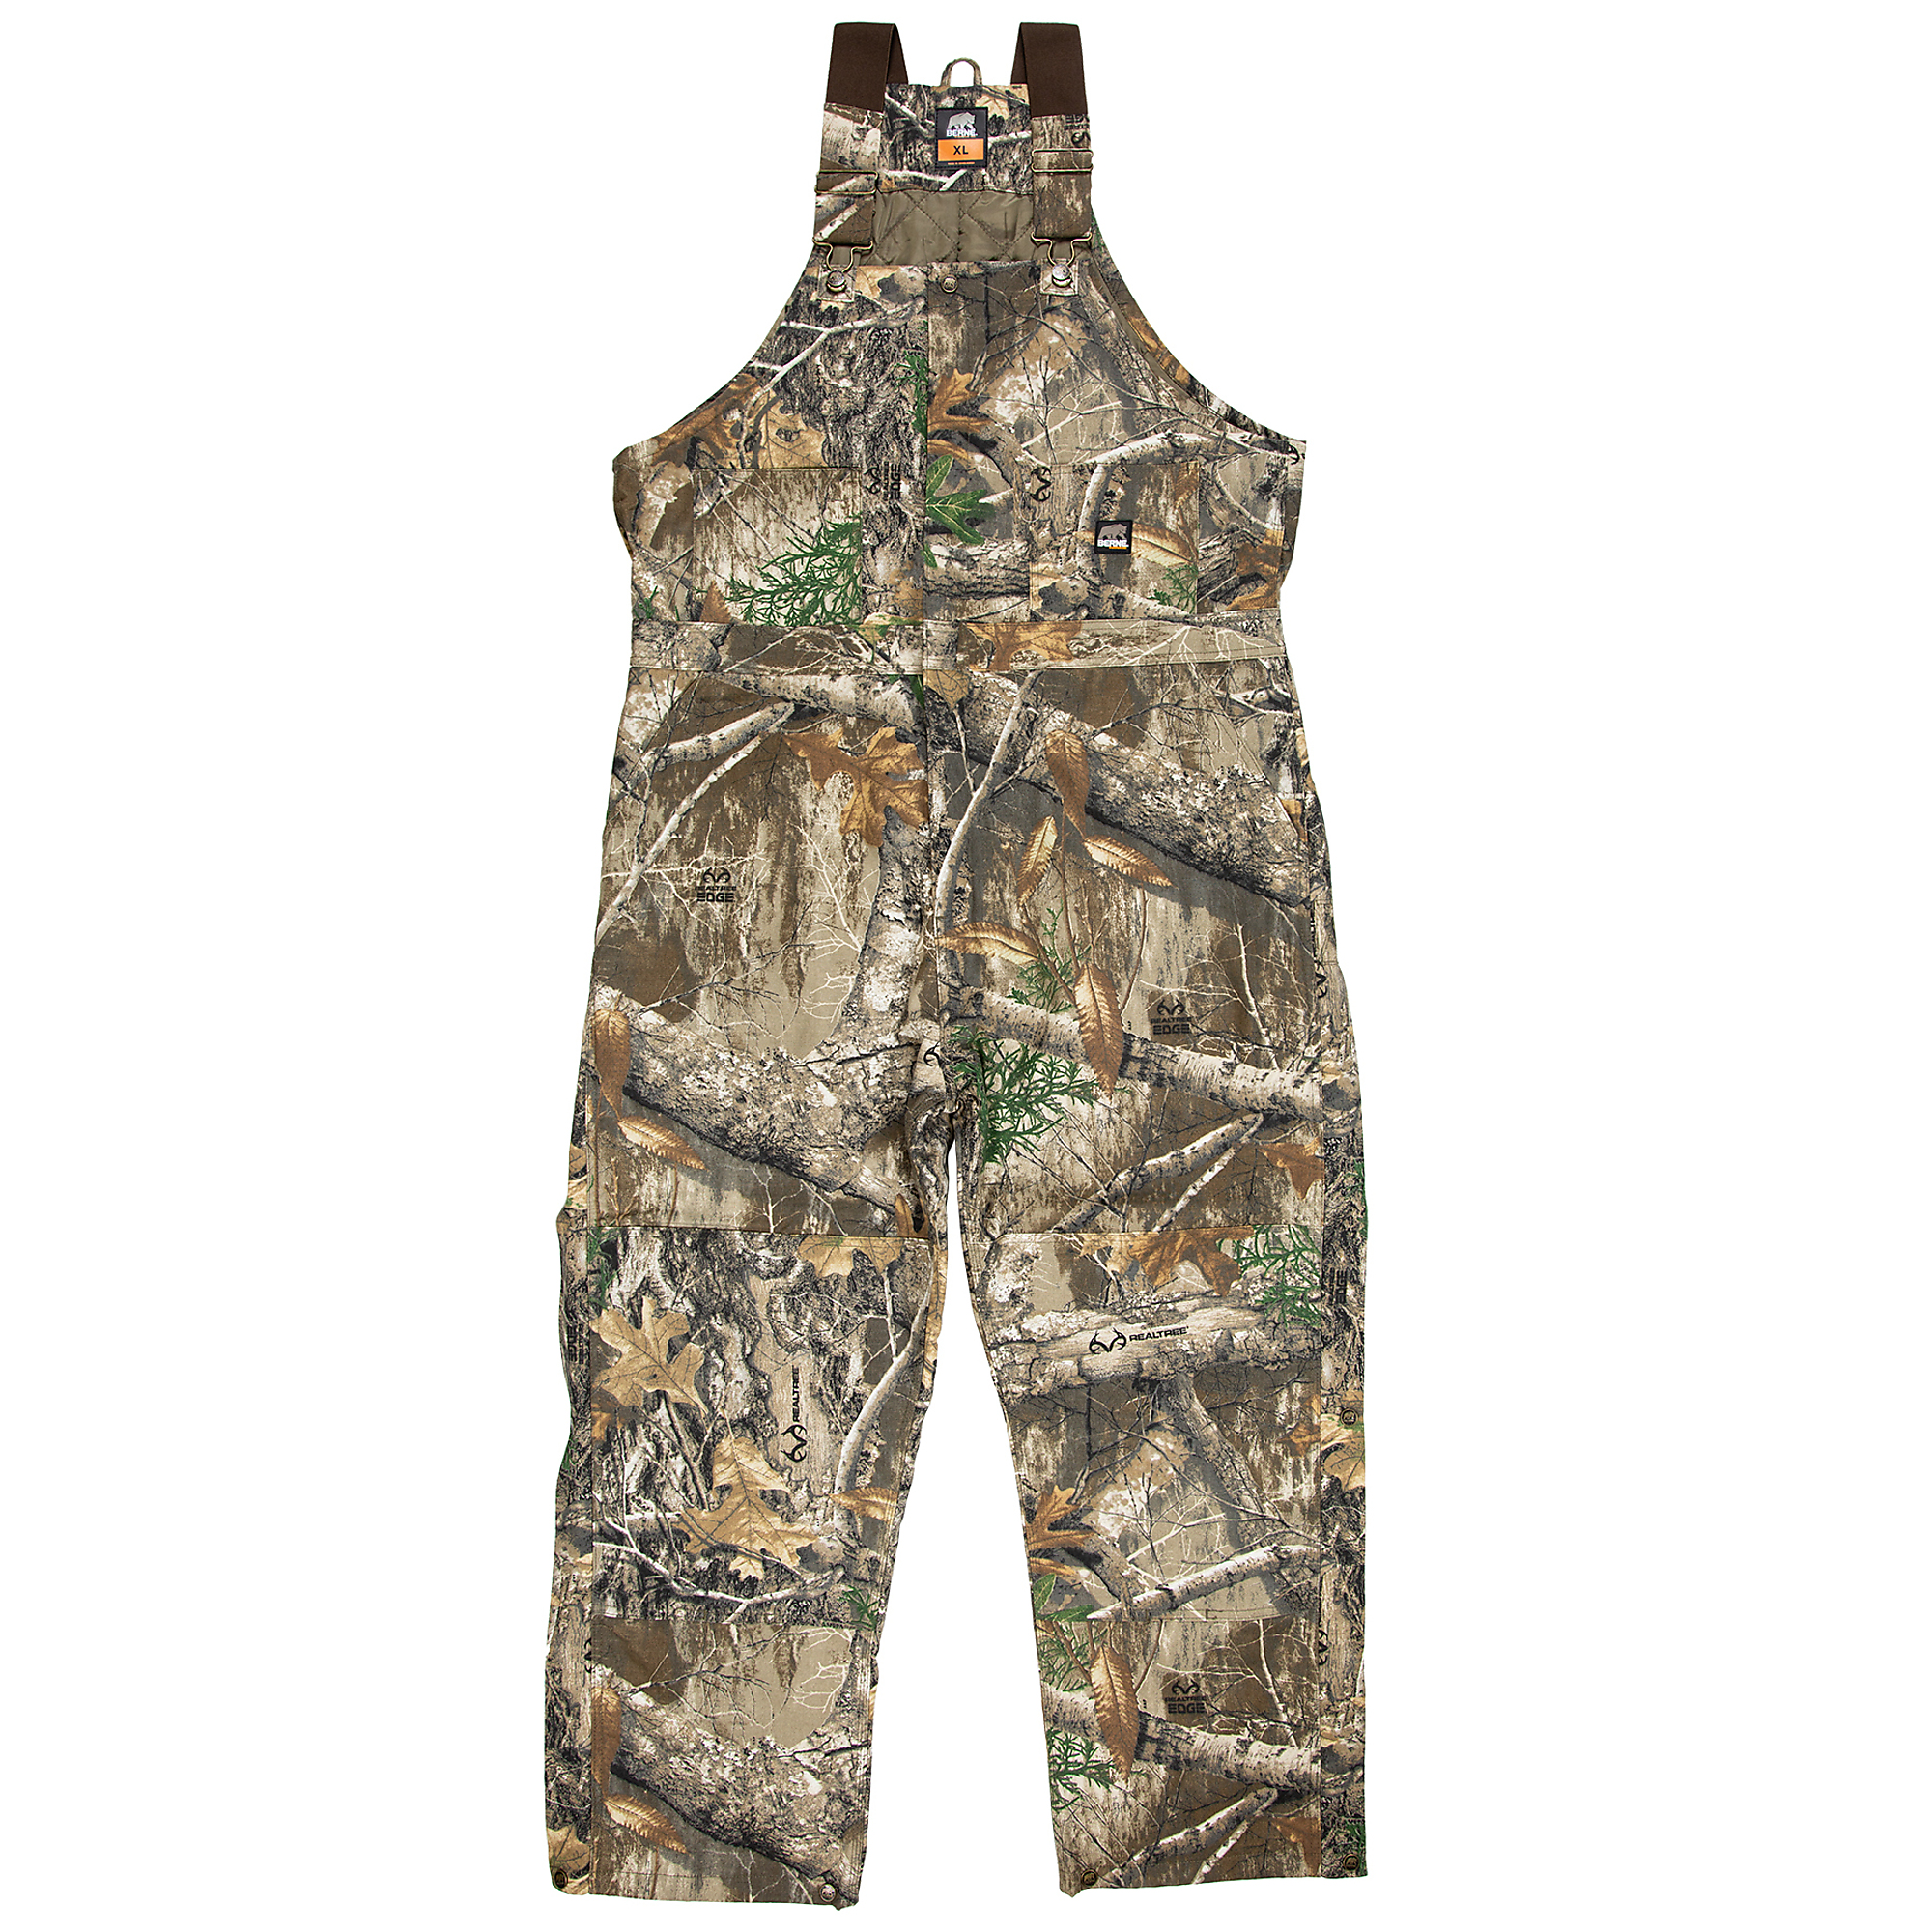 Berne Apparel, Hertiage Insulated Bib Overall, Size 2XLT, Color Realtree Edge, Material Heavy-duty 10 oz. cotton duck, Model B415